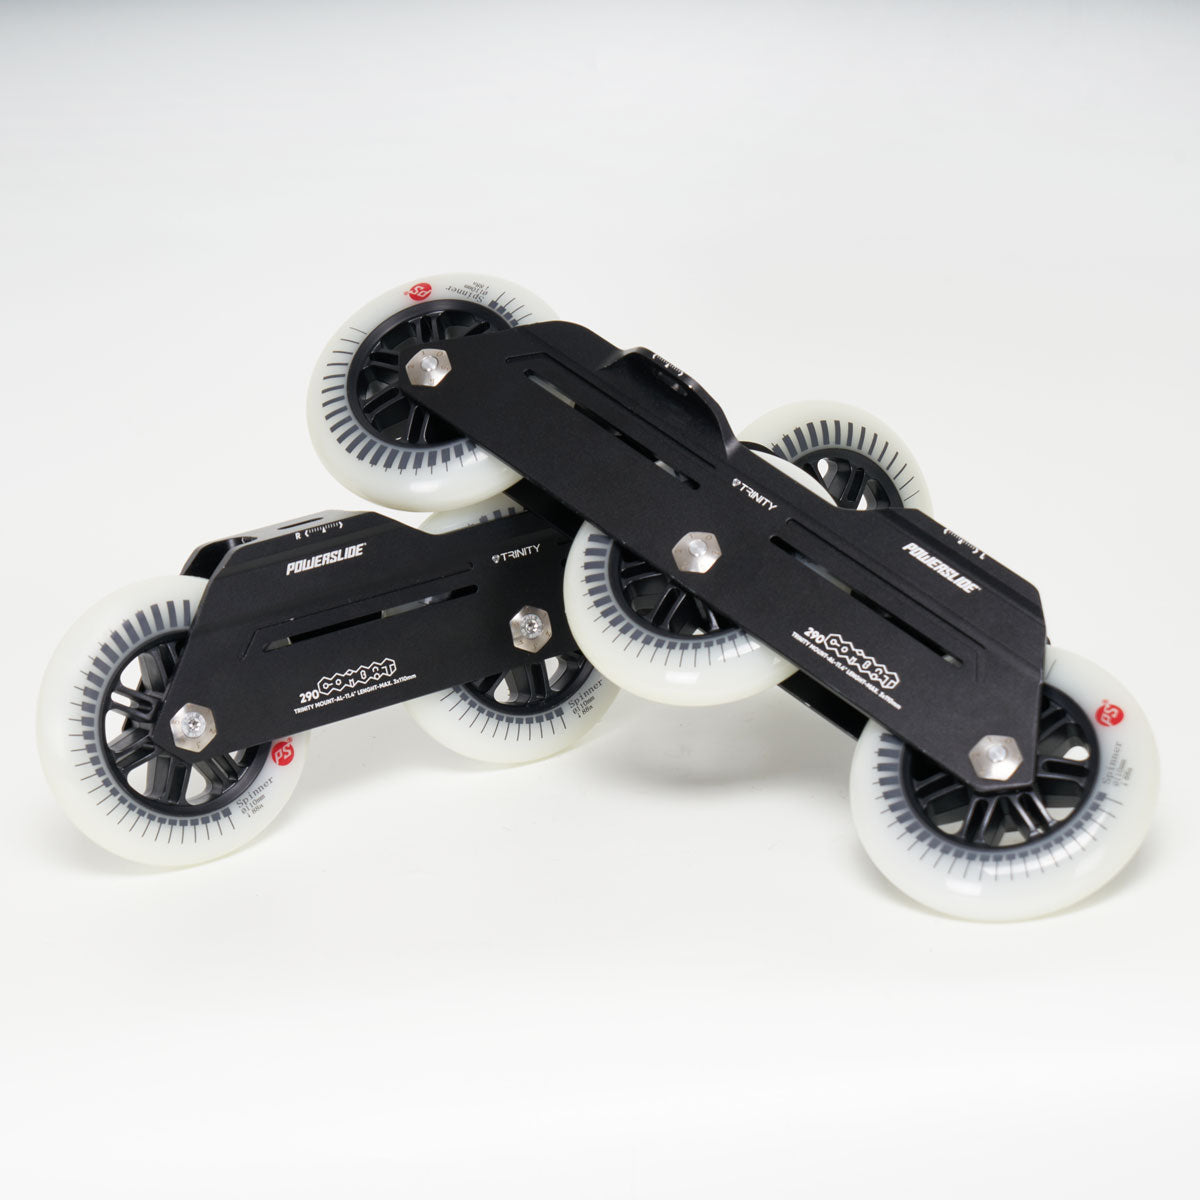 Powerslide Combat Rocker 110 Frames - Multi-Positional Rockered Frame For Powerslide Boots With TRINITY Mount - Complete with Spinner Wheels and Bearings